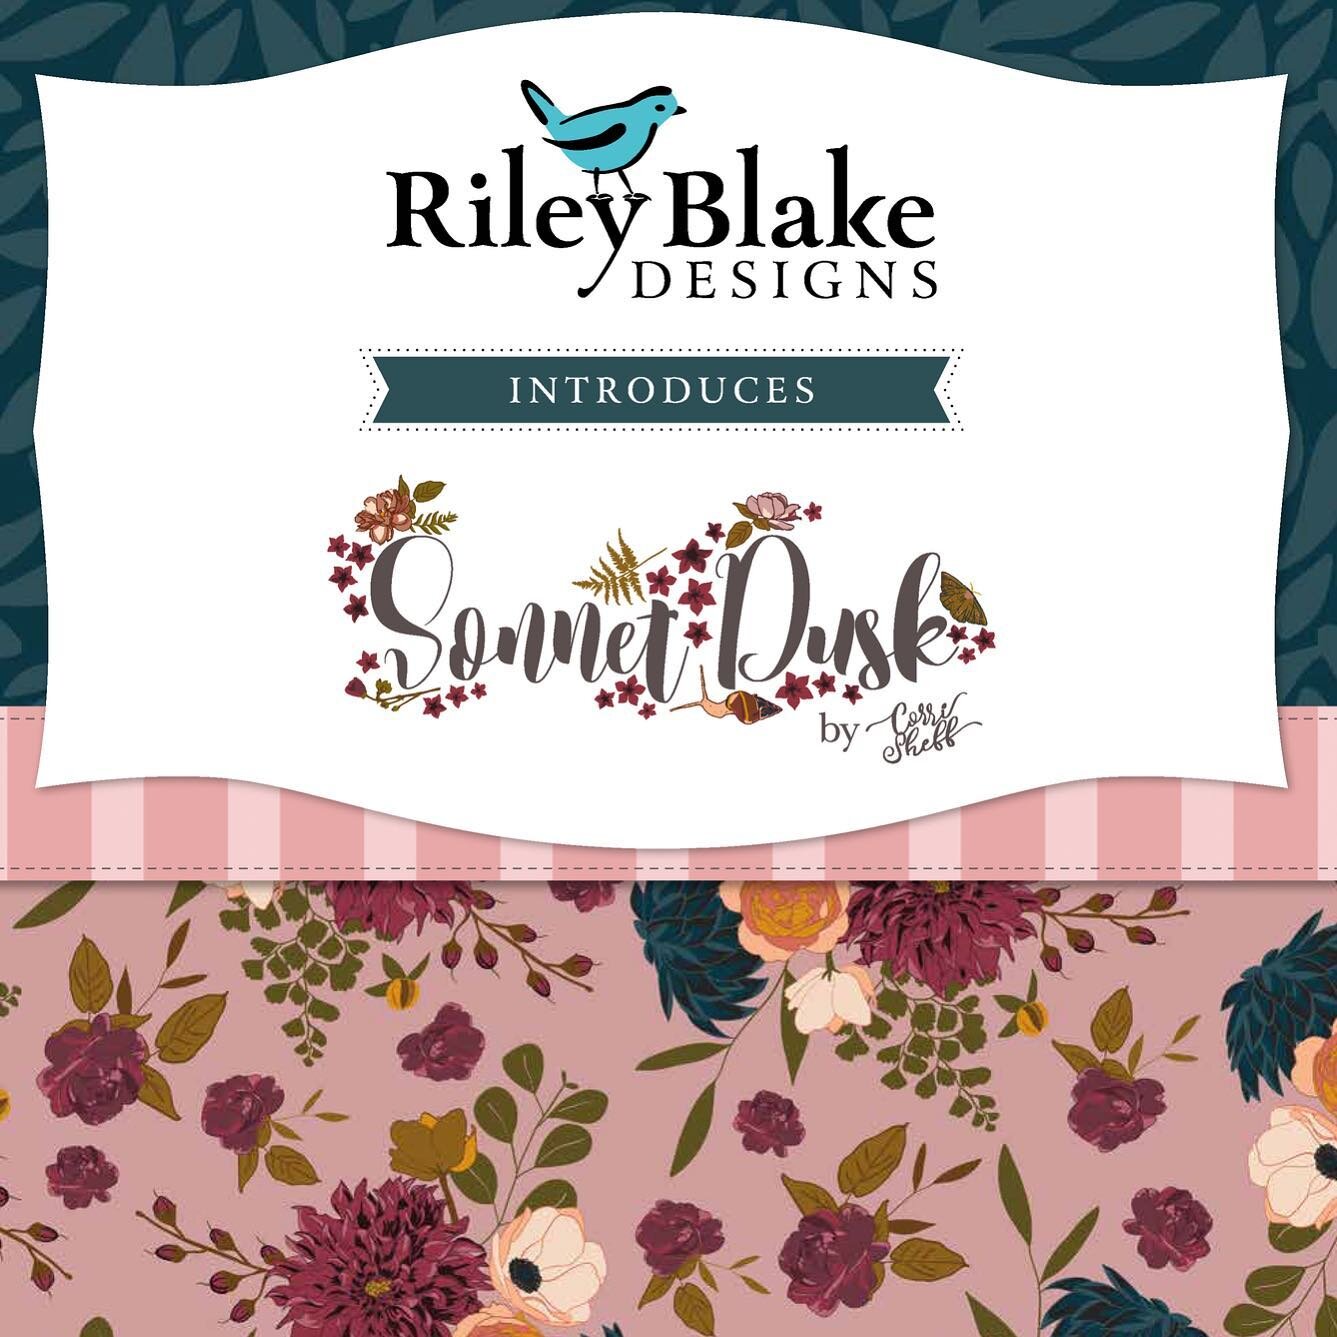 Today is the day!! I can't wait to show you my upcoming collection Sonnet Dusk at this year's Virtual Quilt Market with @rileyblakedesigns! I hope you'll tune in to this FB Event and join me! My collection showcase is scheduled for today at 12:30 pm 